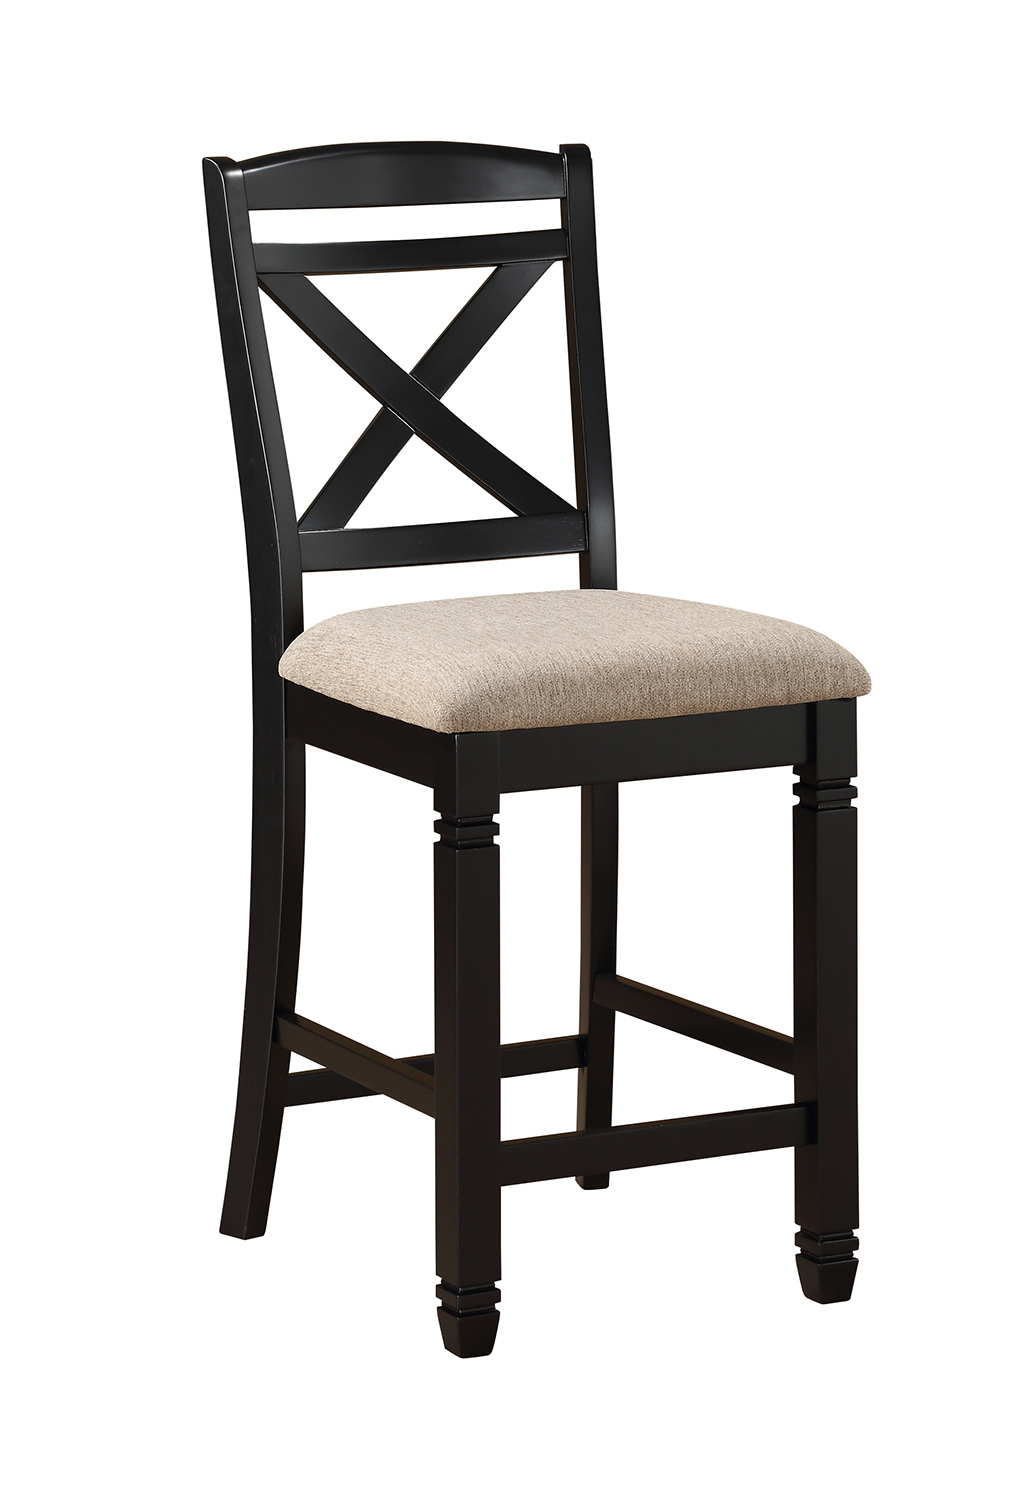 Homelegance Baywater Counter Height Chair - Black -Natural